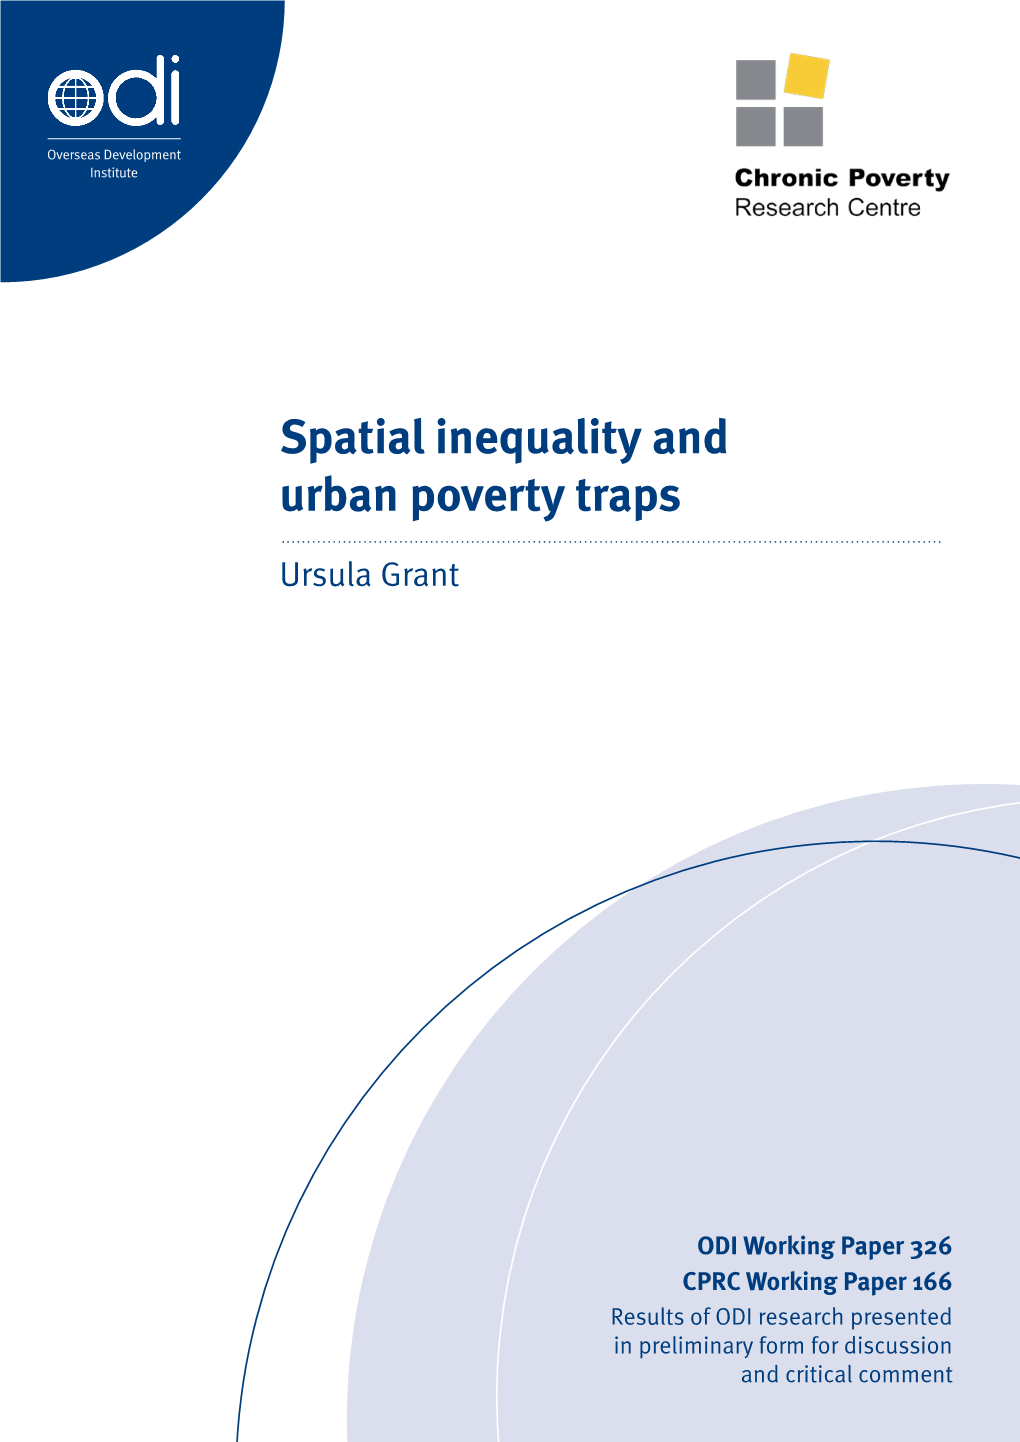 Spatial Inequality and Urban Poverty Traps